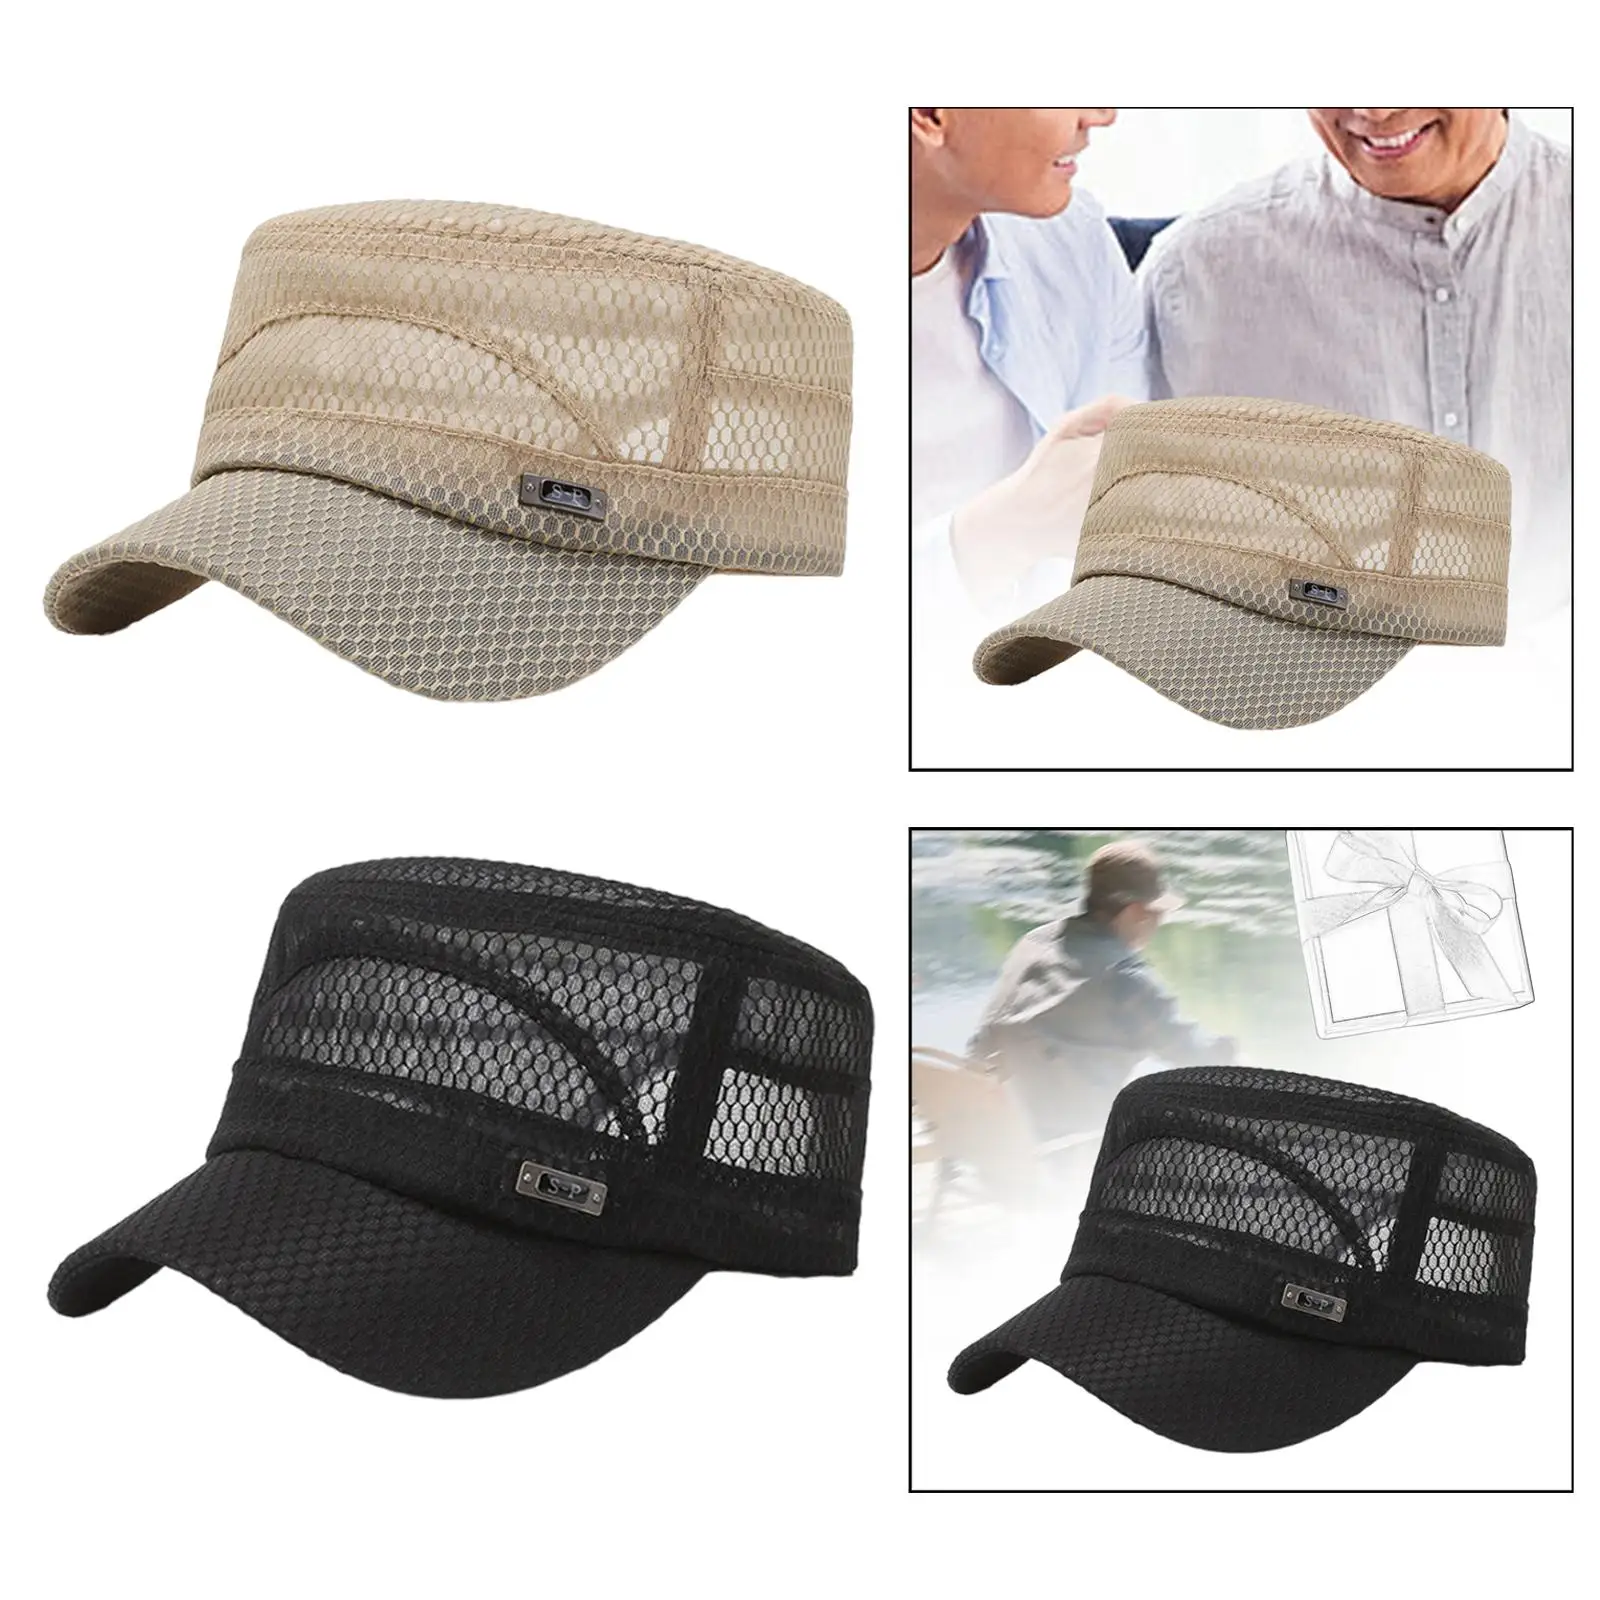 Baseball Cap Cooling Adjustable Sun Hat Quick Dry Trucker Hat Breathable Mesh Hat for Hiking Men Women Camping Outdoor Sports